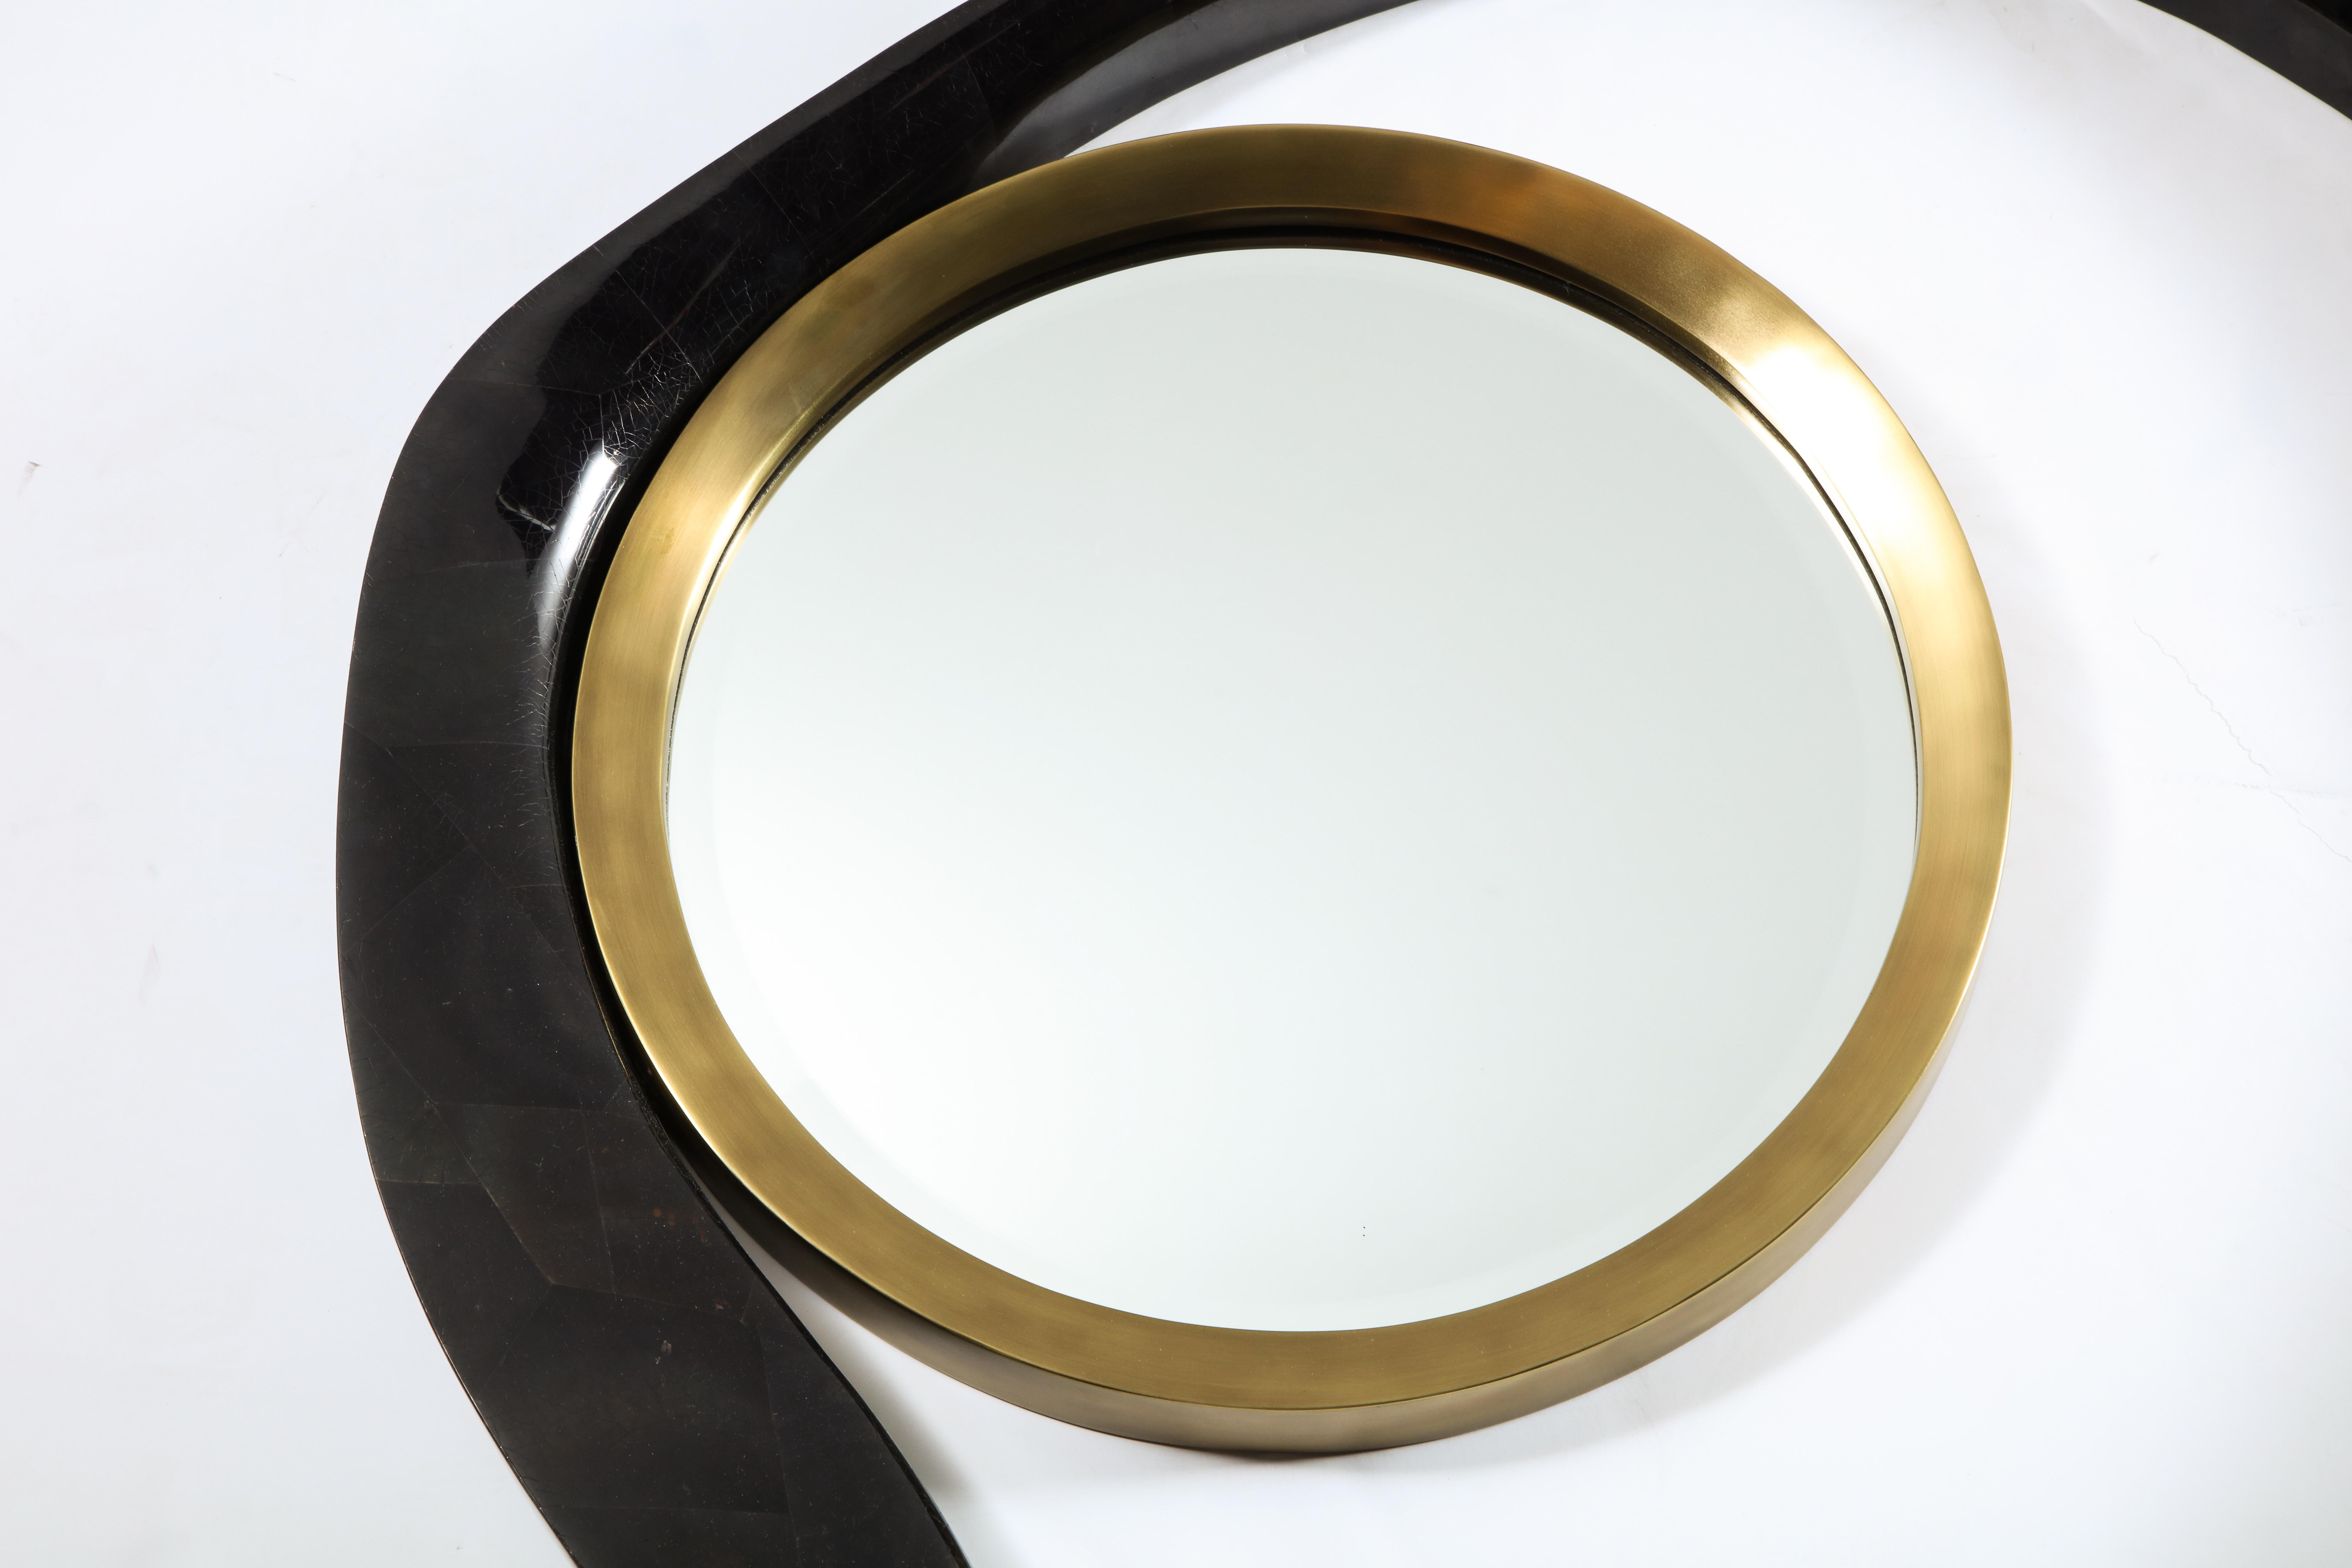 Art Deco Mirror, Black Sea Shell with Brass Detail, Large Organic Style, Contemporary